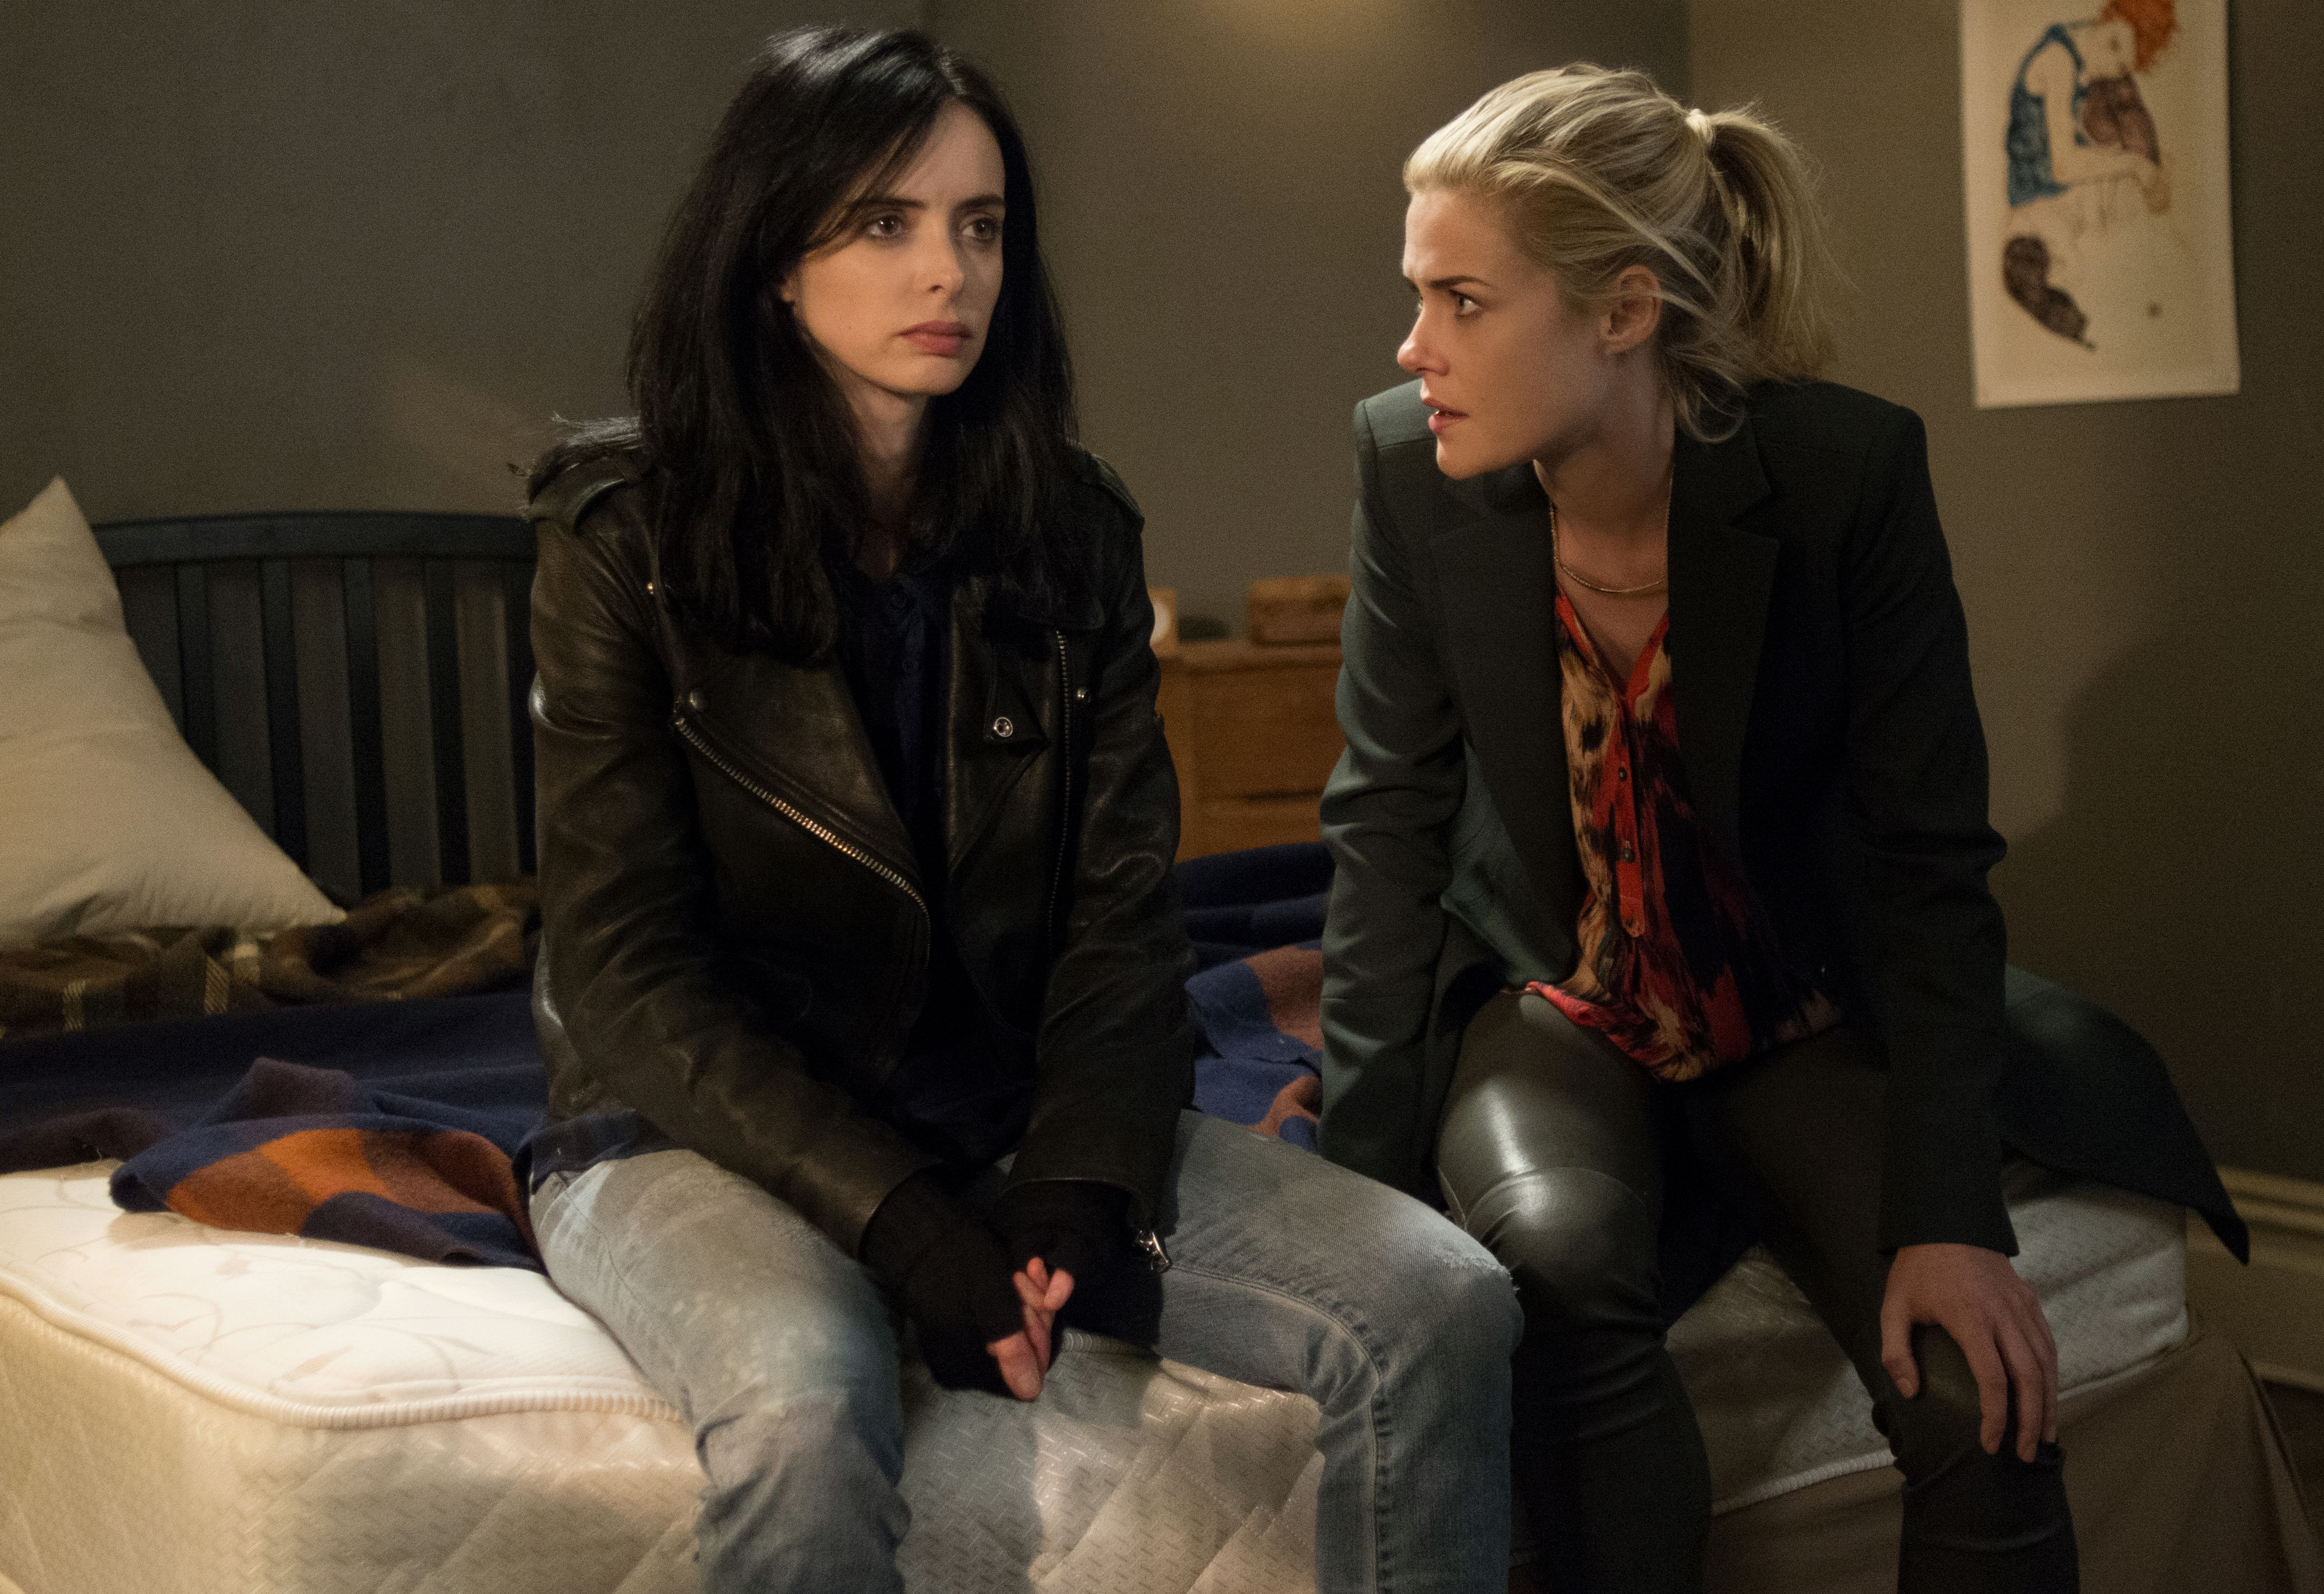 Krysten Ritter and Rachael Taylor as Jessica Jones and Trish Walter